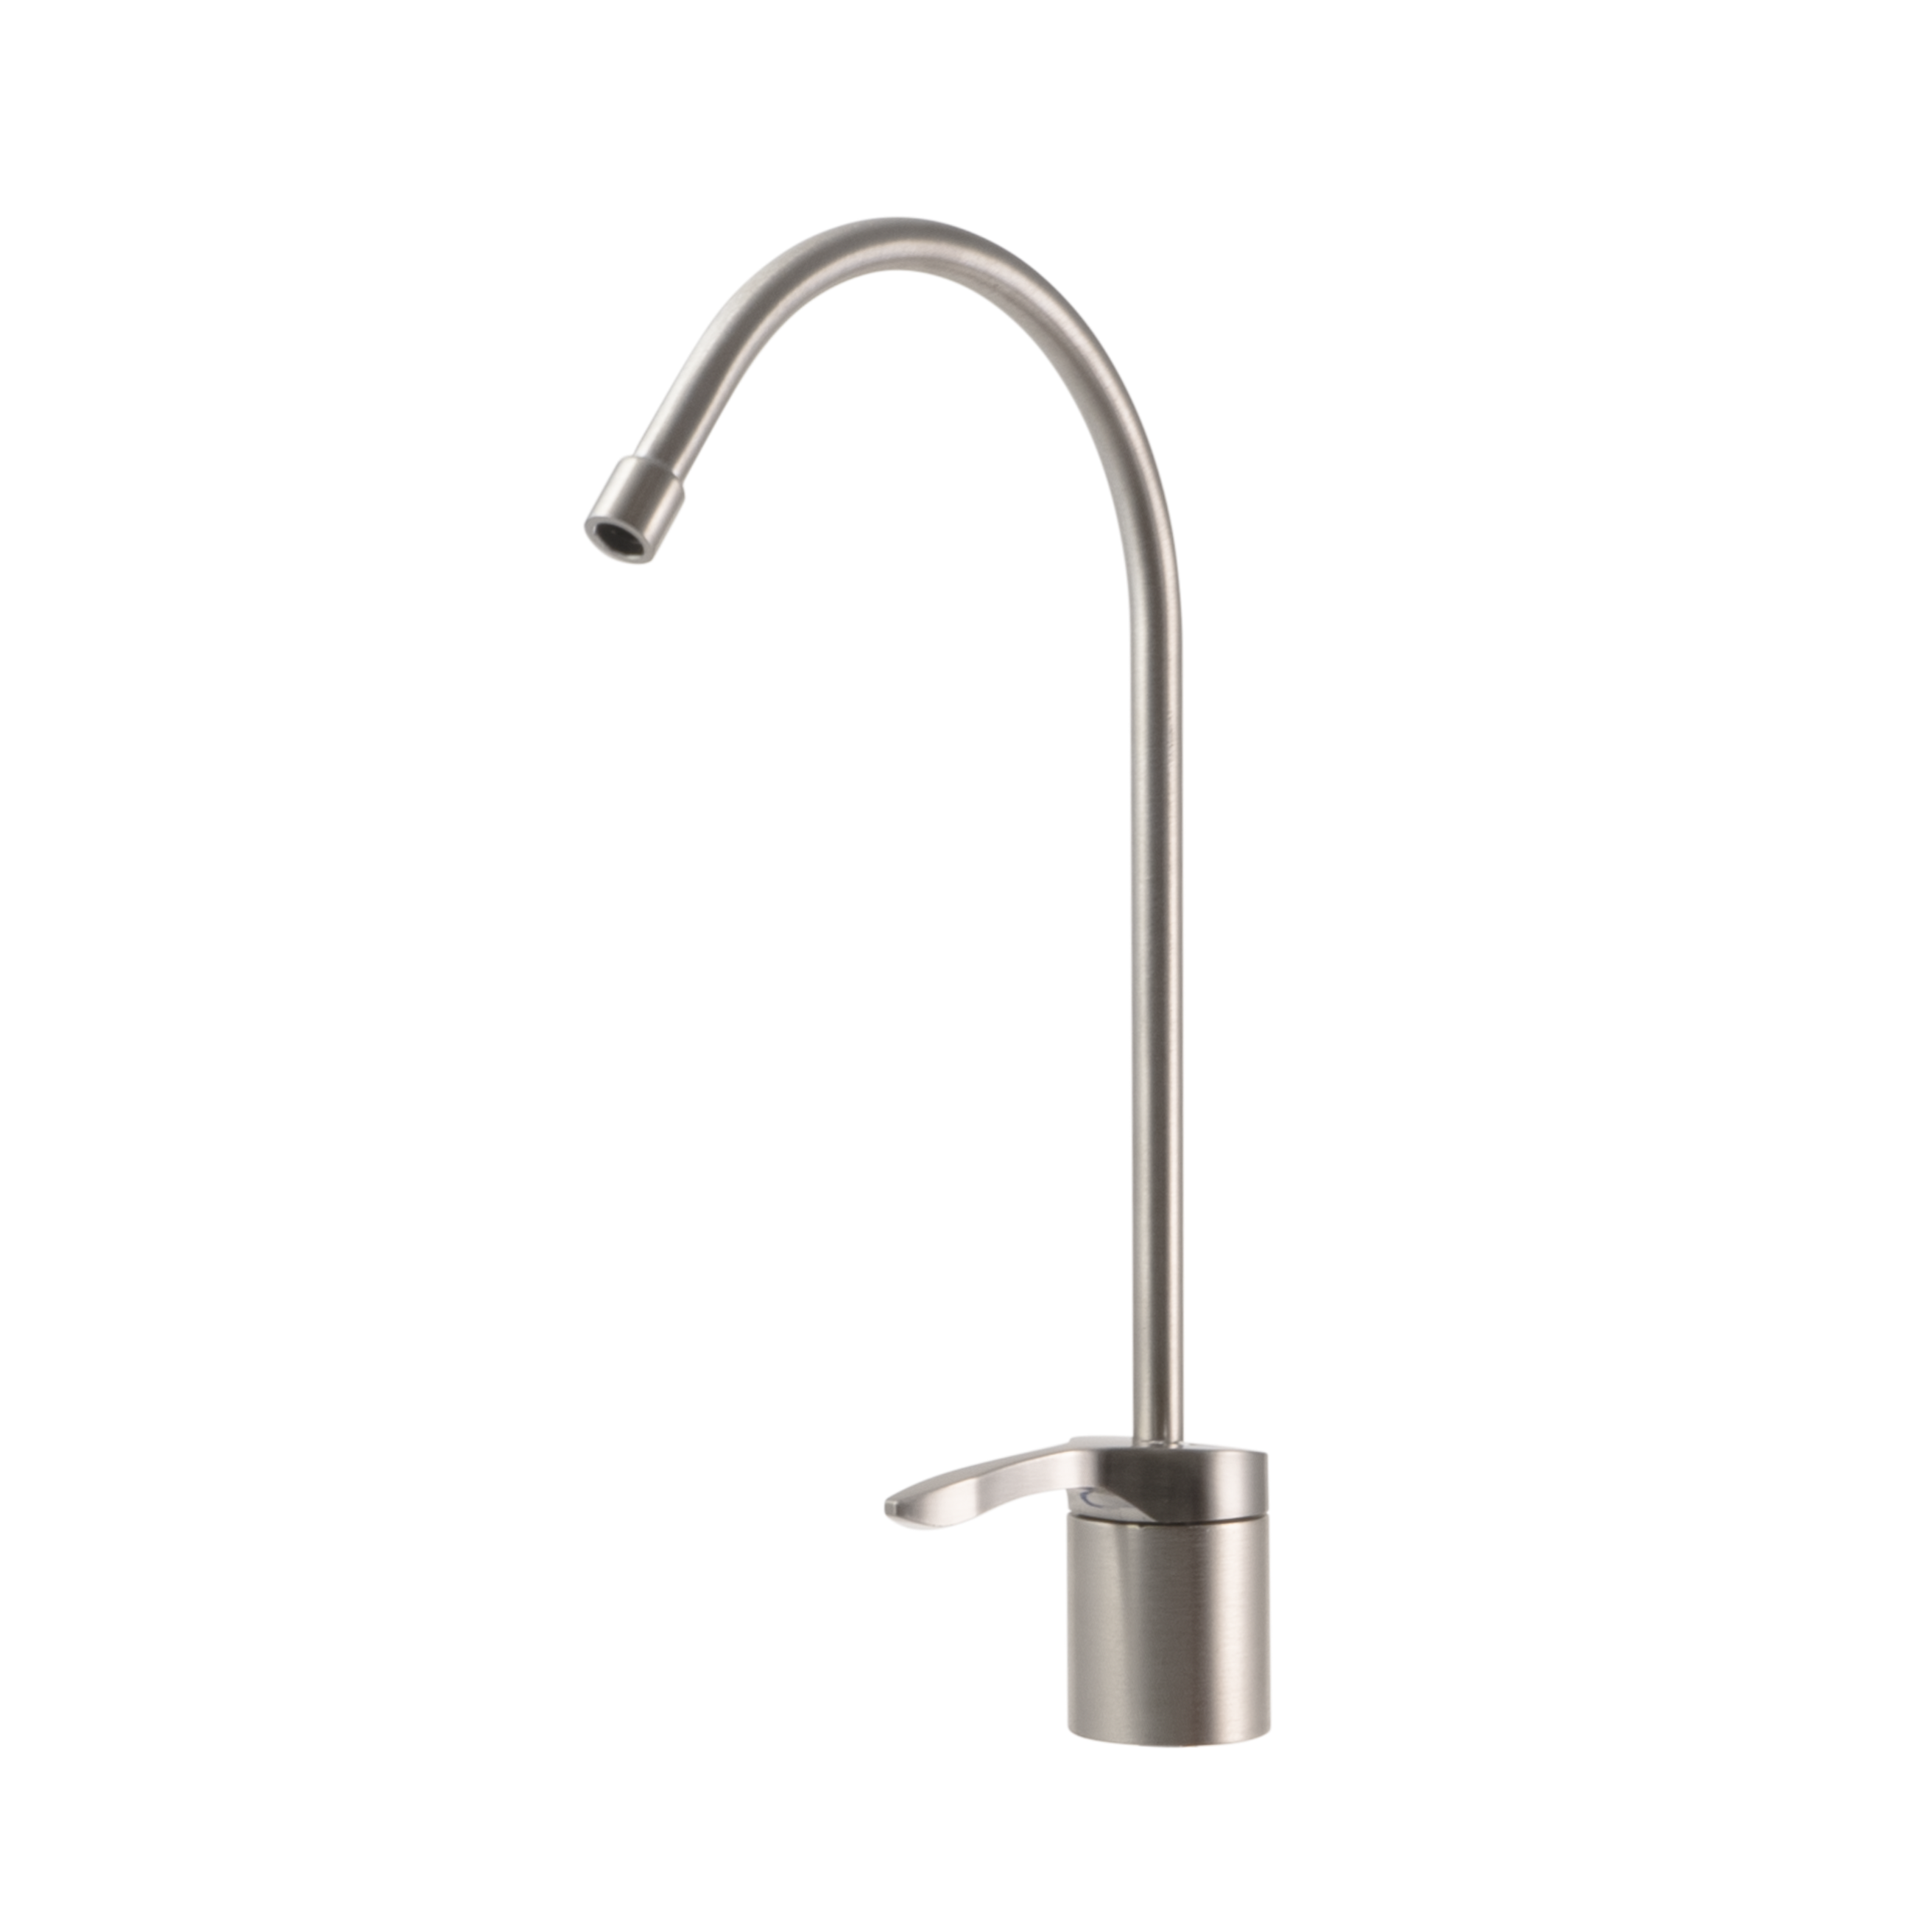 Brushed Nickel Drinking Water Faucet For Kitchen Counters Sink